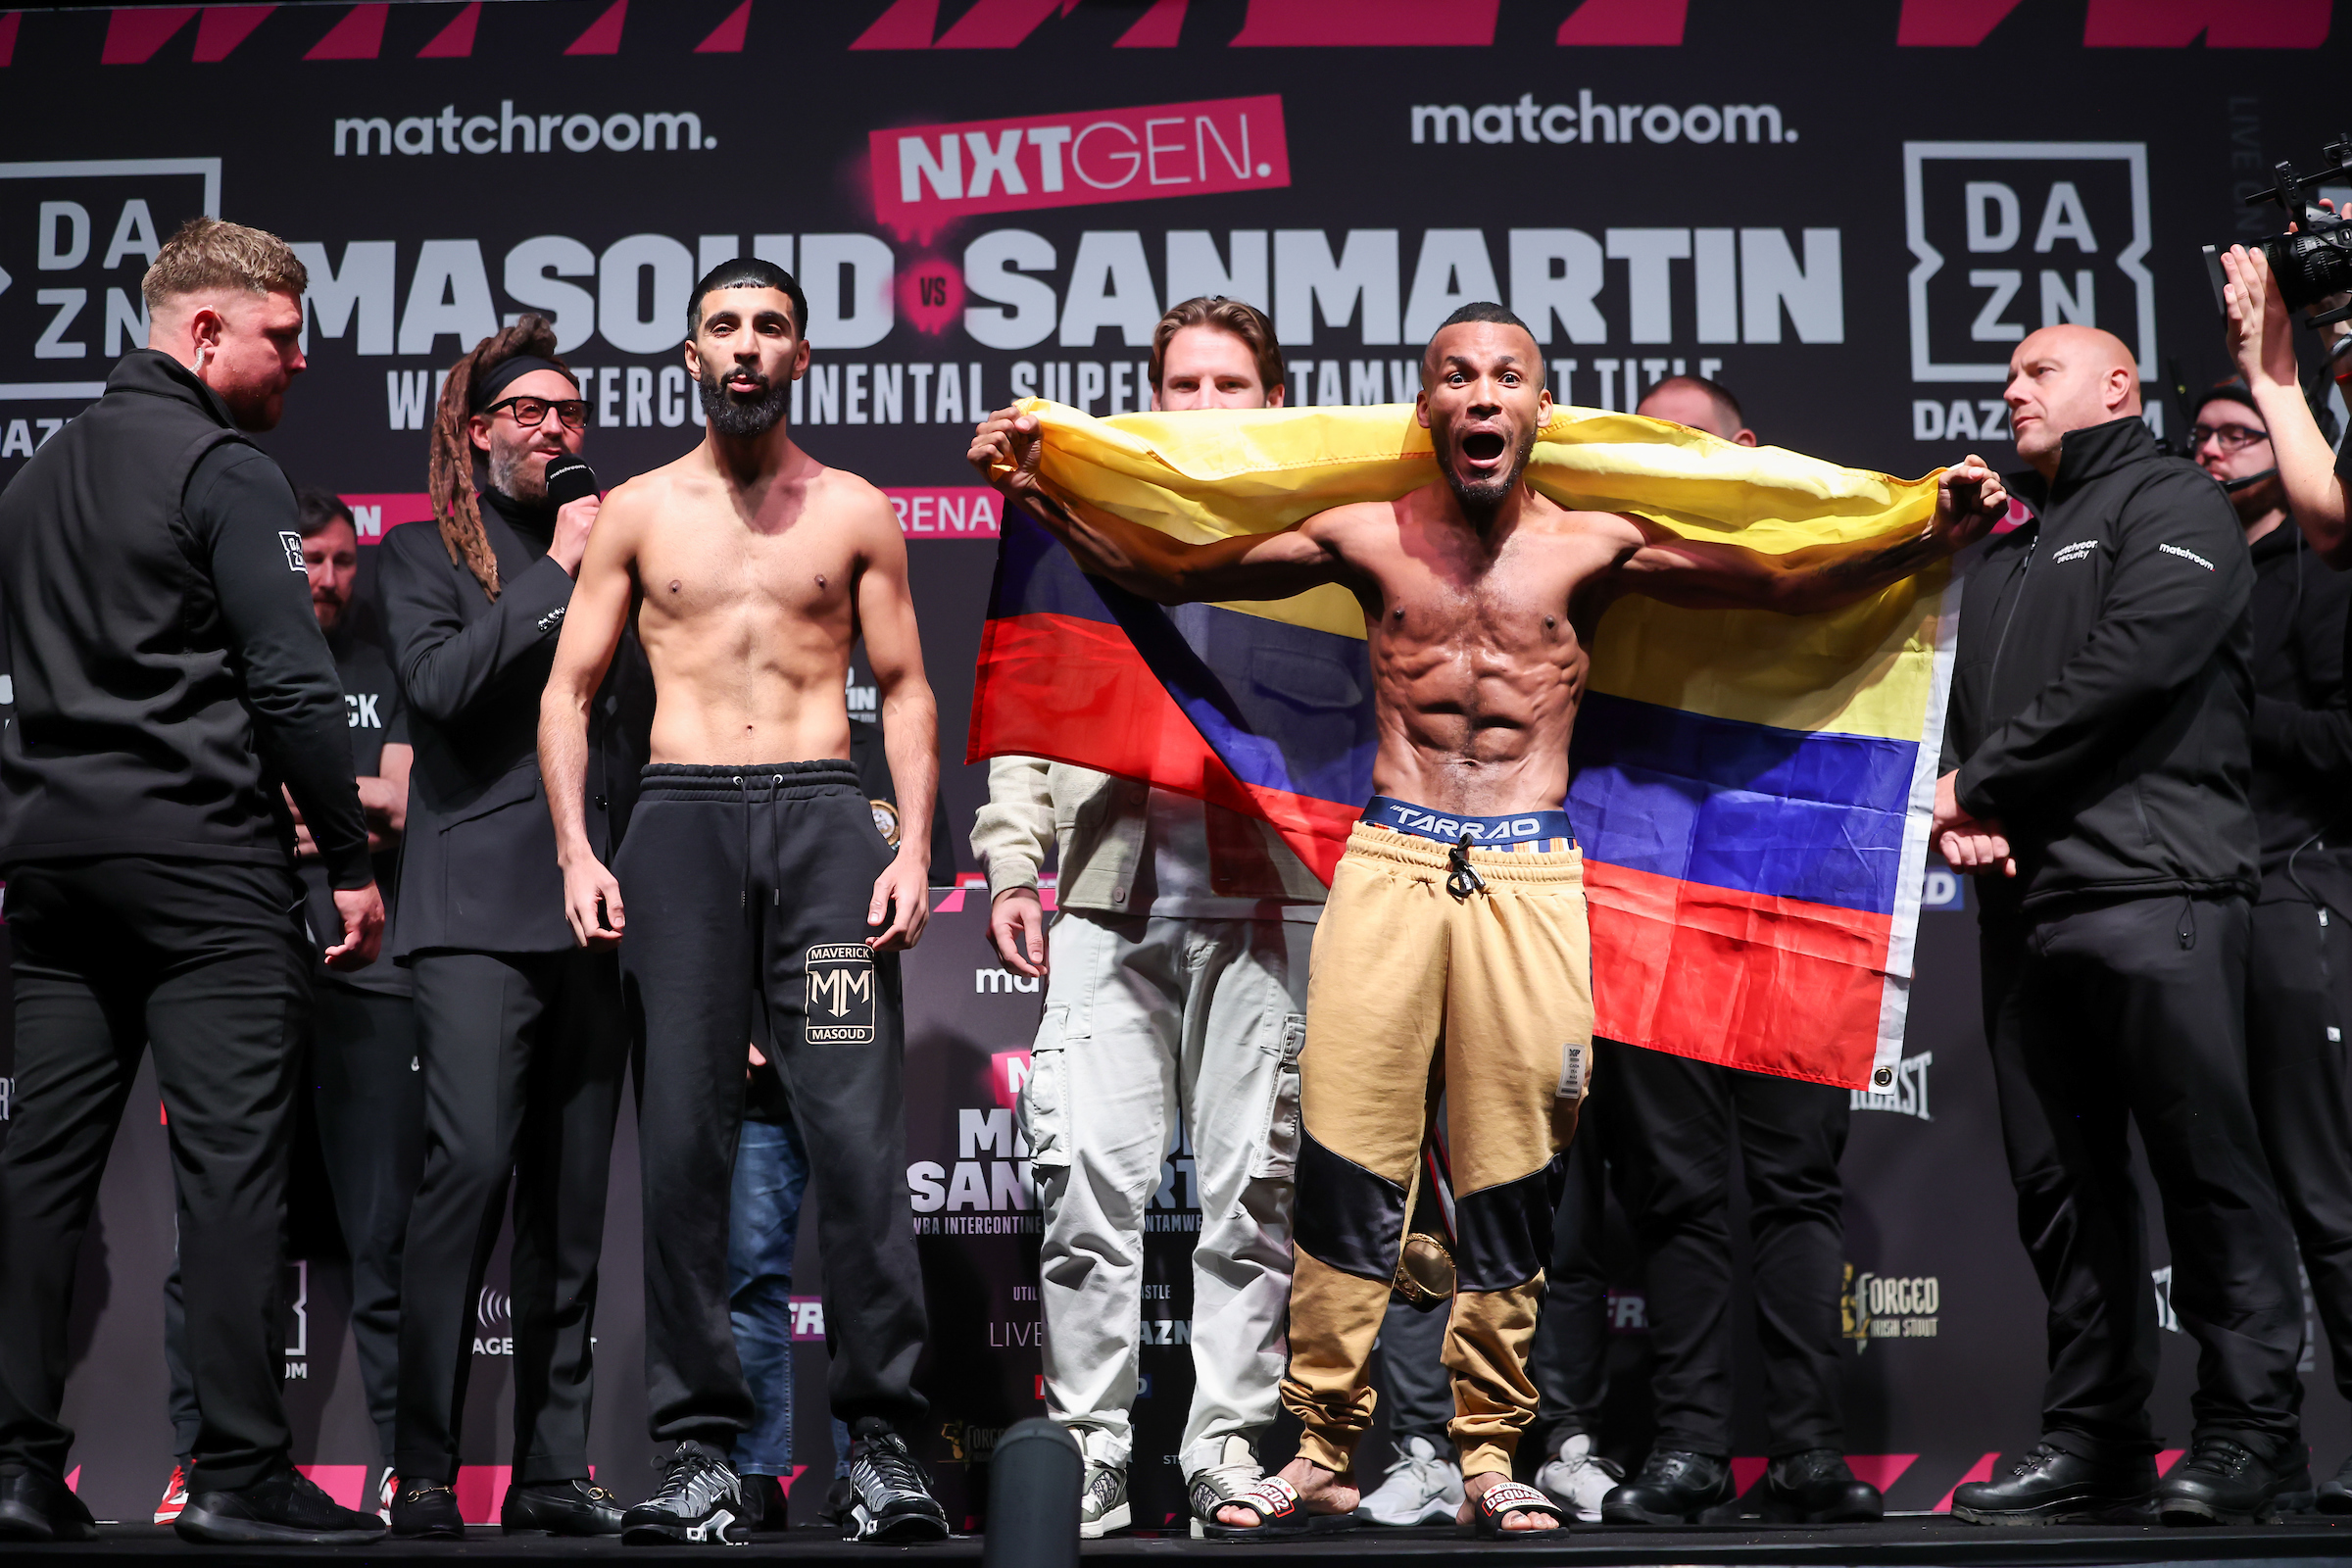 Masoud vs. Sanmartin: Weigh-In Results, Running Order & Betting Odds